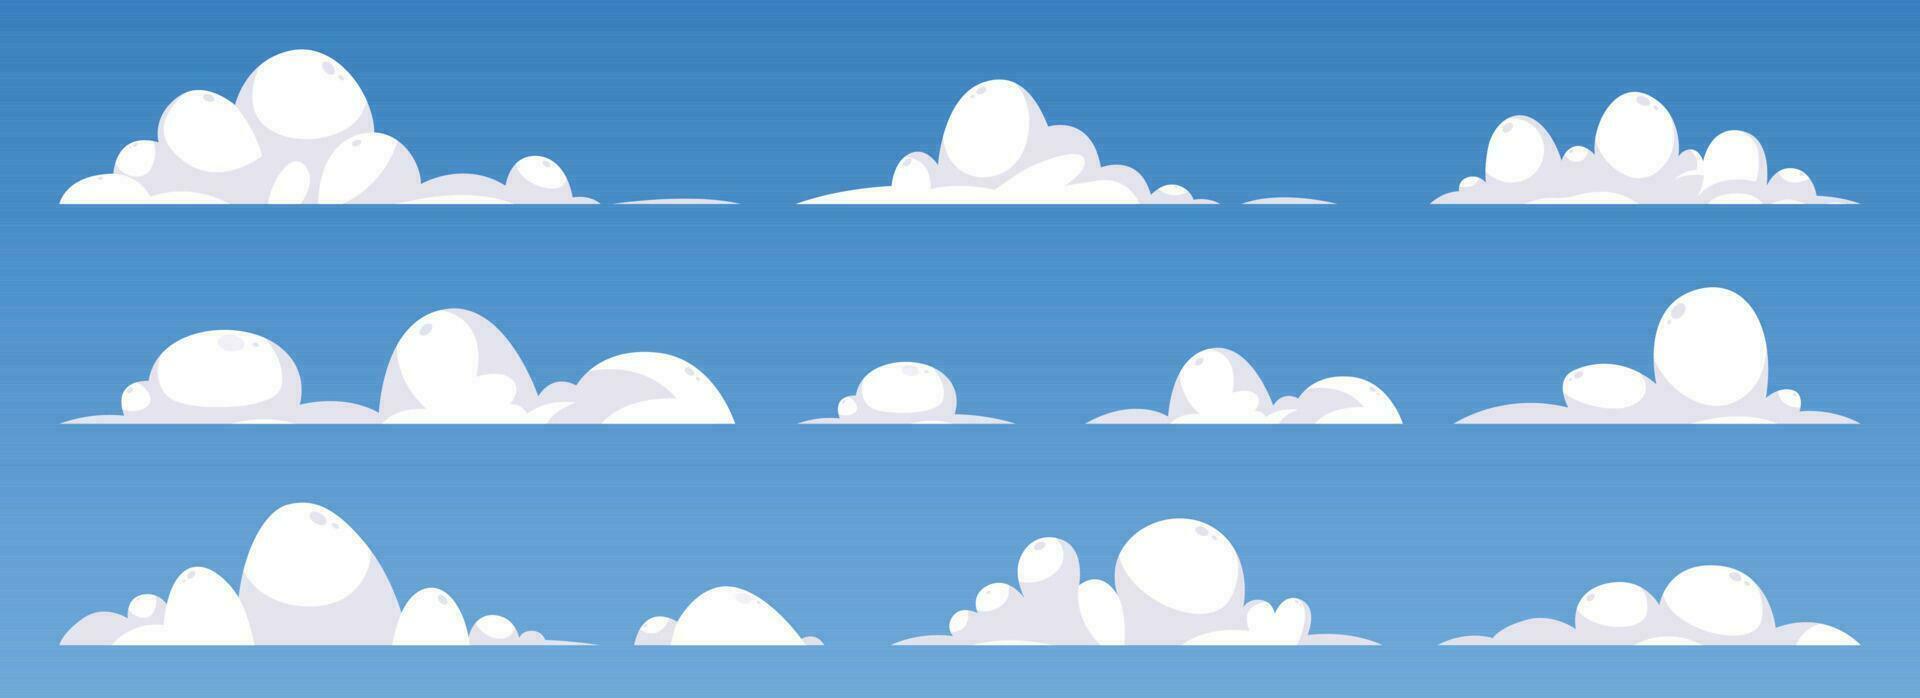 Cartoon clouds collection vector illustration isolated on white background